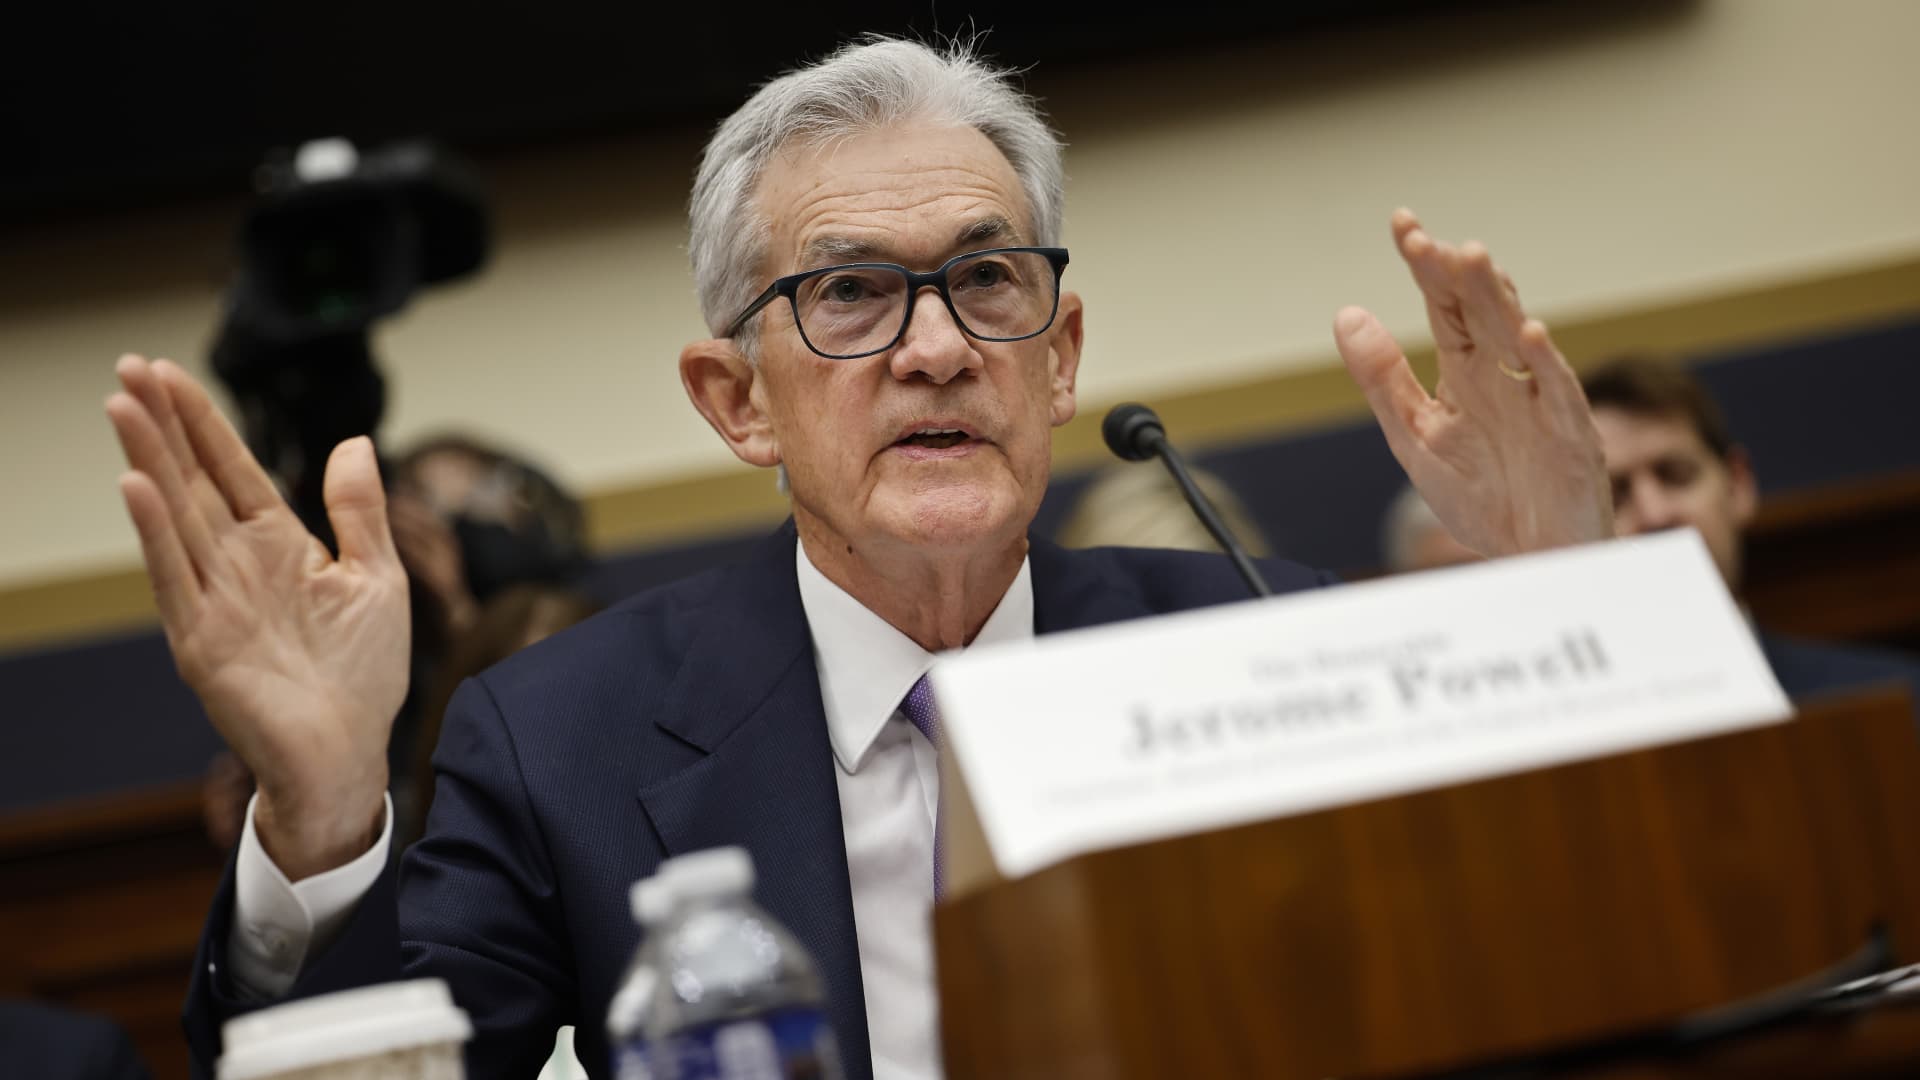 Powell reinforces position that the Fed is not ready to start cutting interest rates